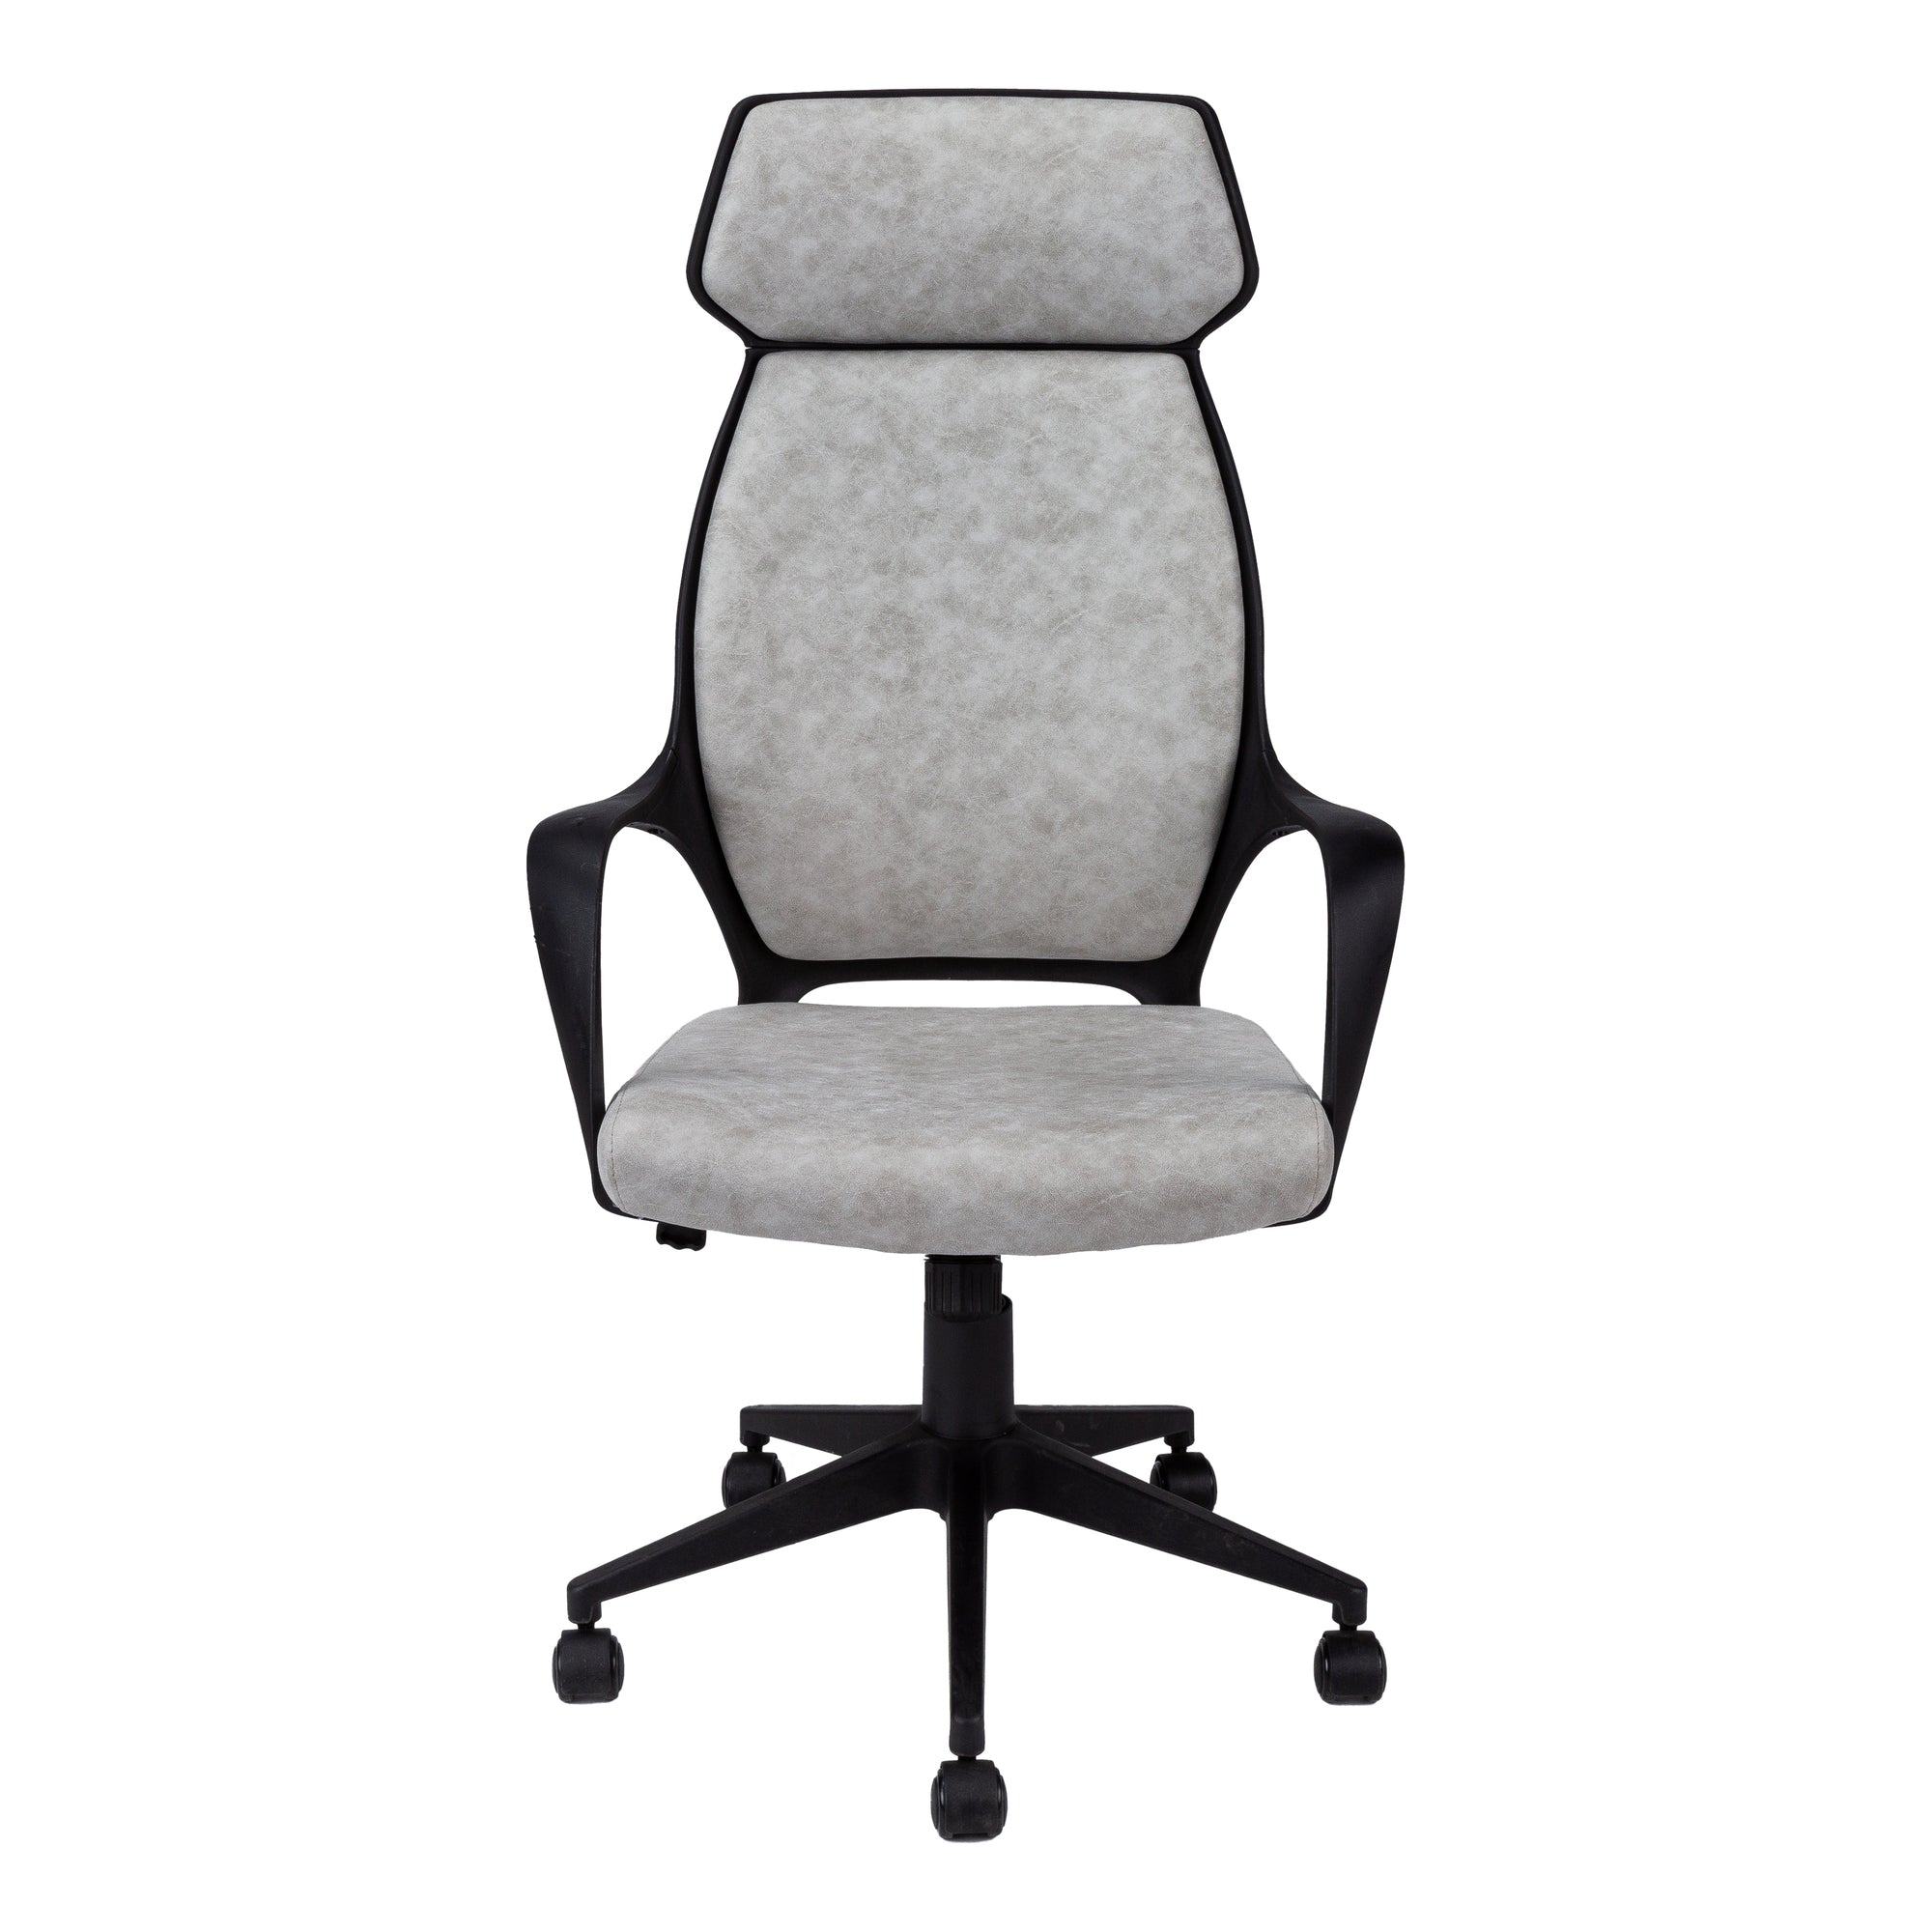 Black-Microfiber-Seat-Swivel-Adjustable-Executive-Chair-Fabric-Back-Plastic-Frame-Office-Chairs